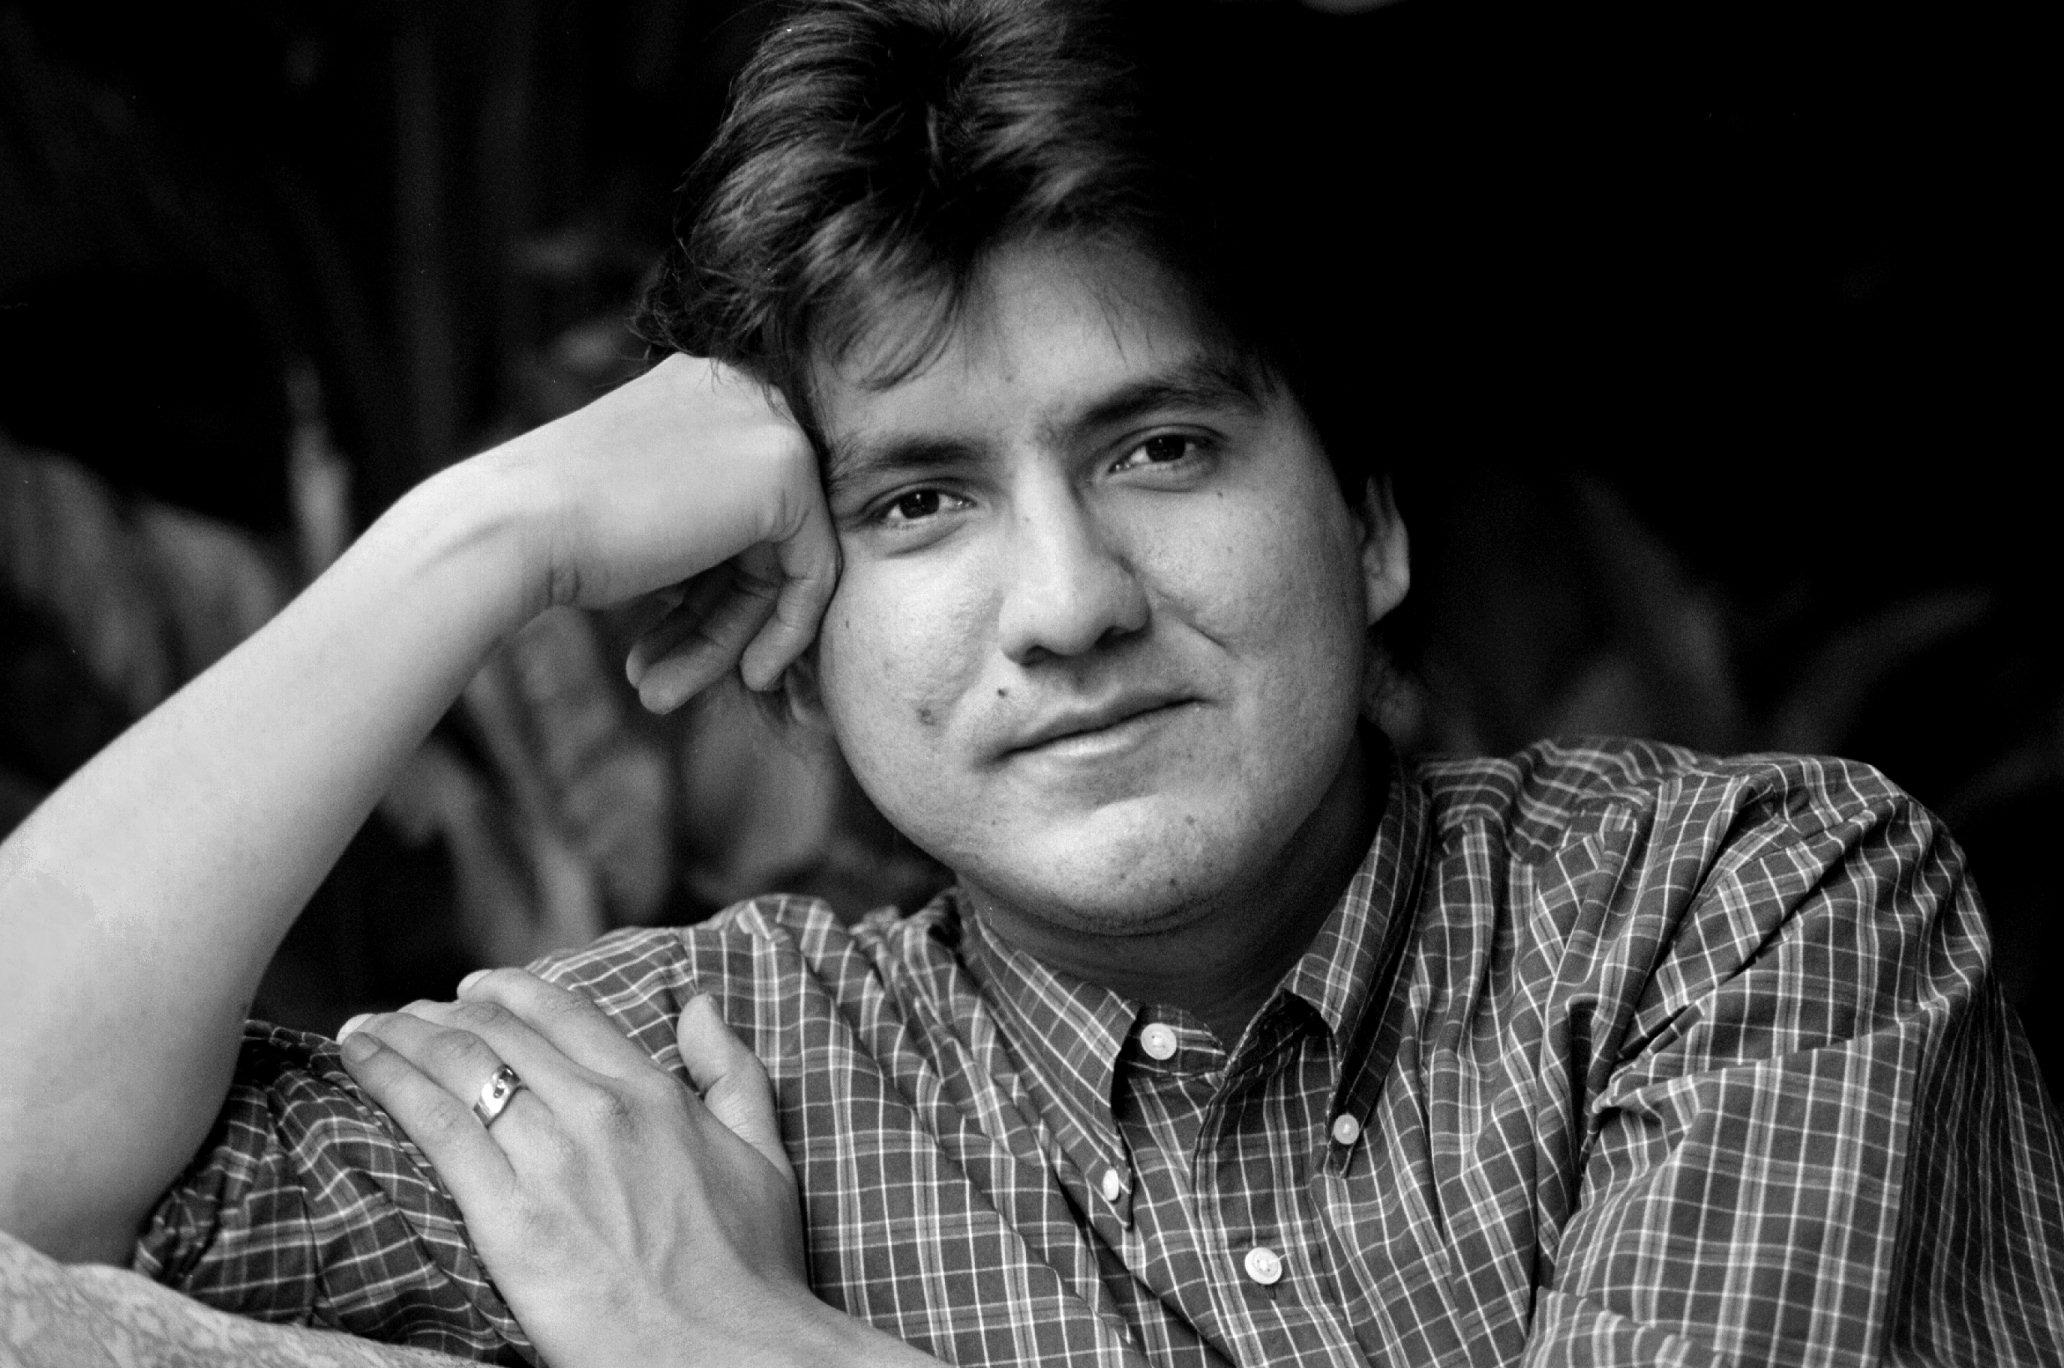 06/26/98 - Four Seasons, Georgetown - BRIEF DESCRIPTION: Sherman Alexie is the writer/director of 'S